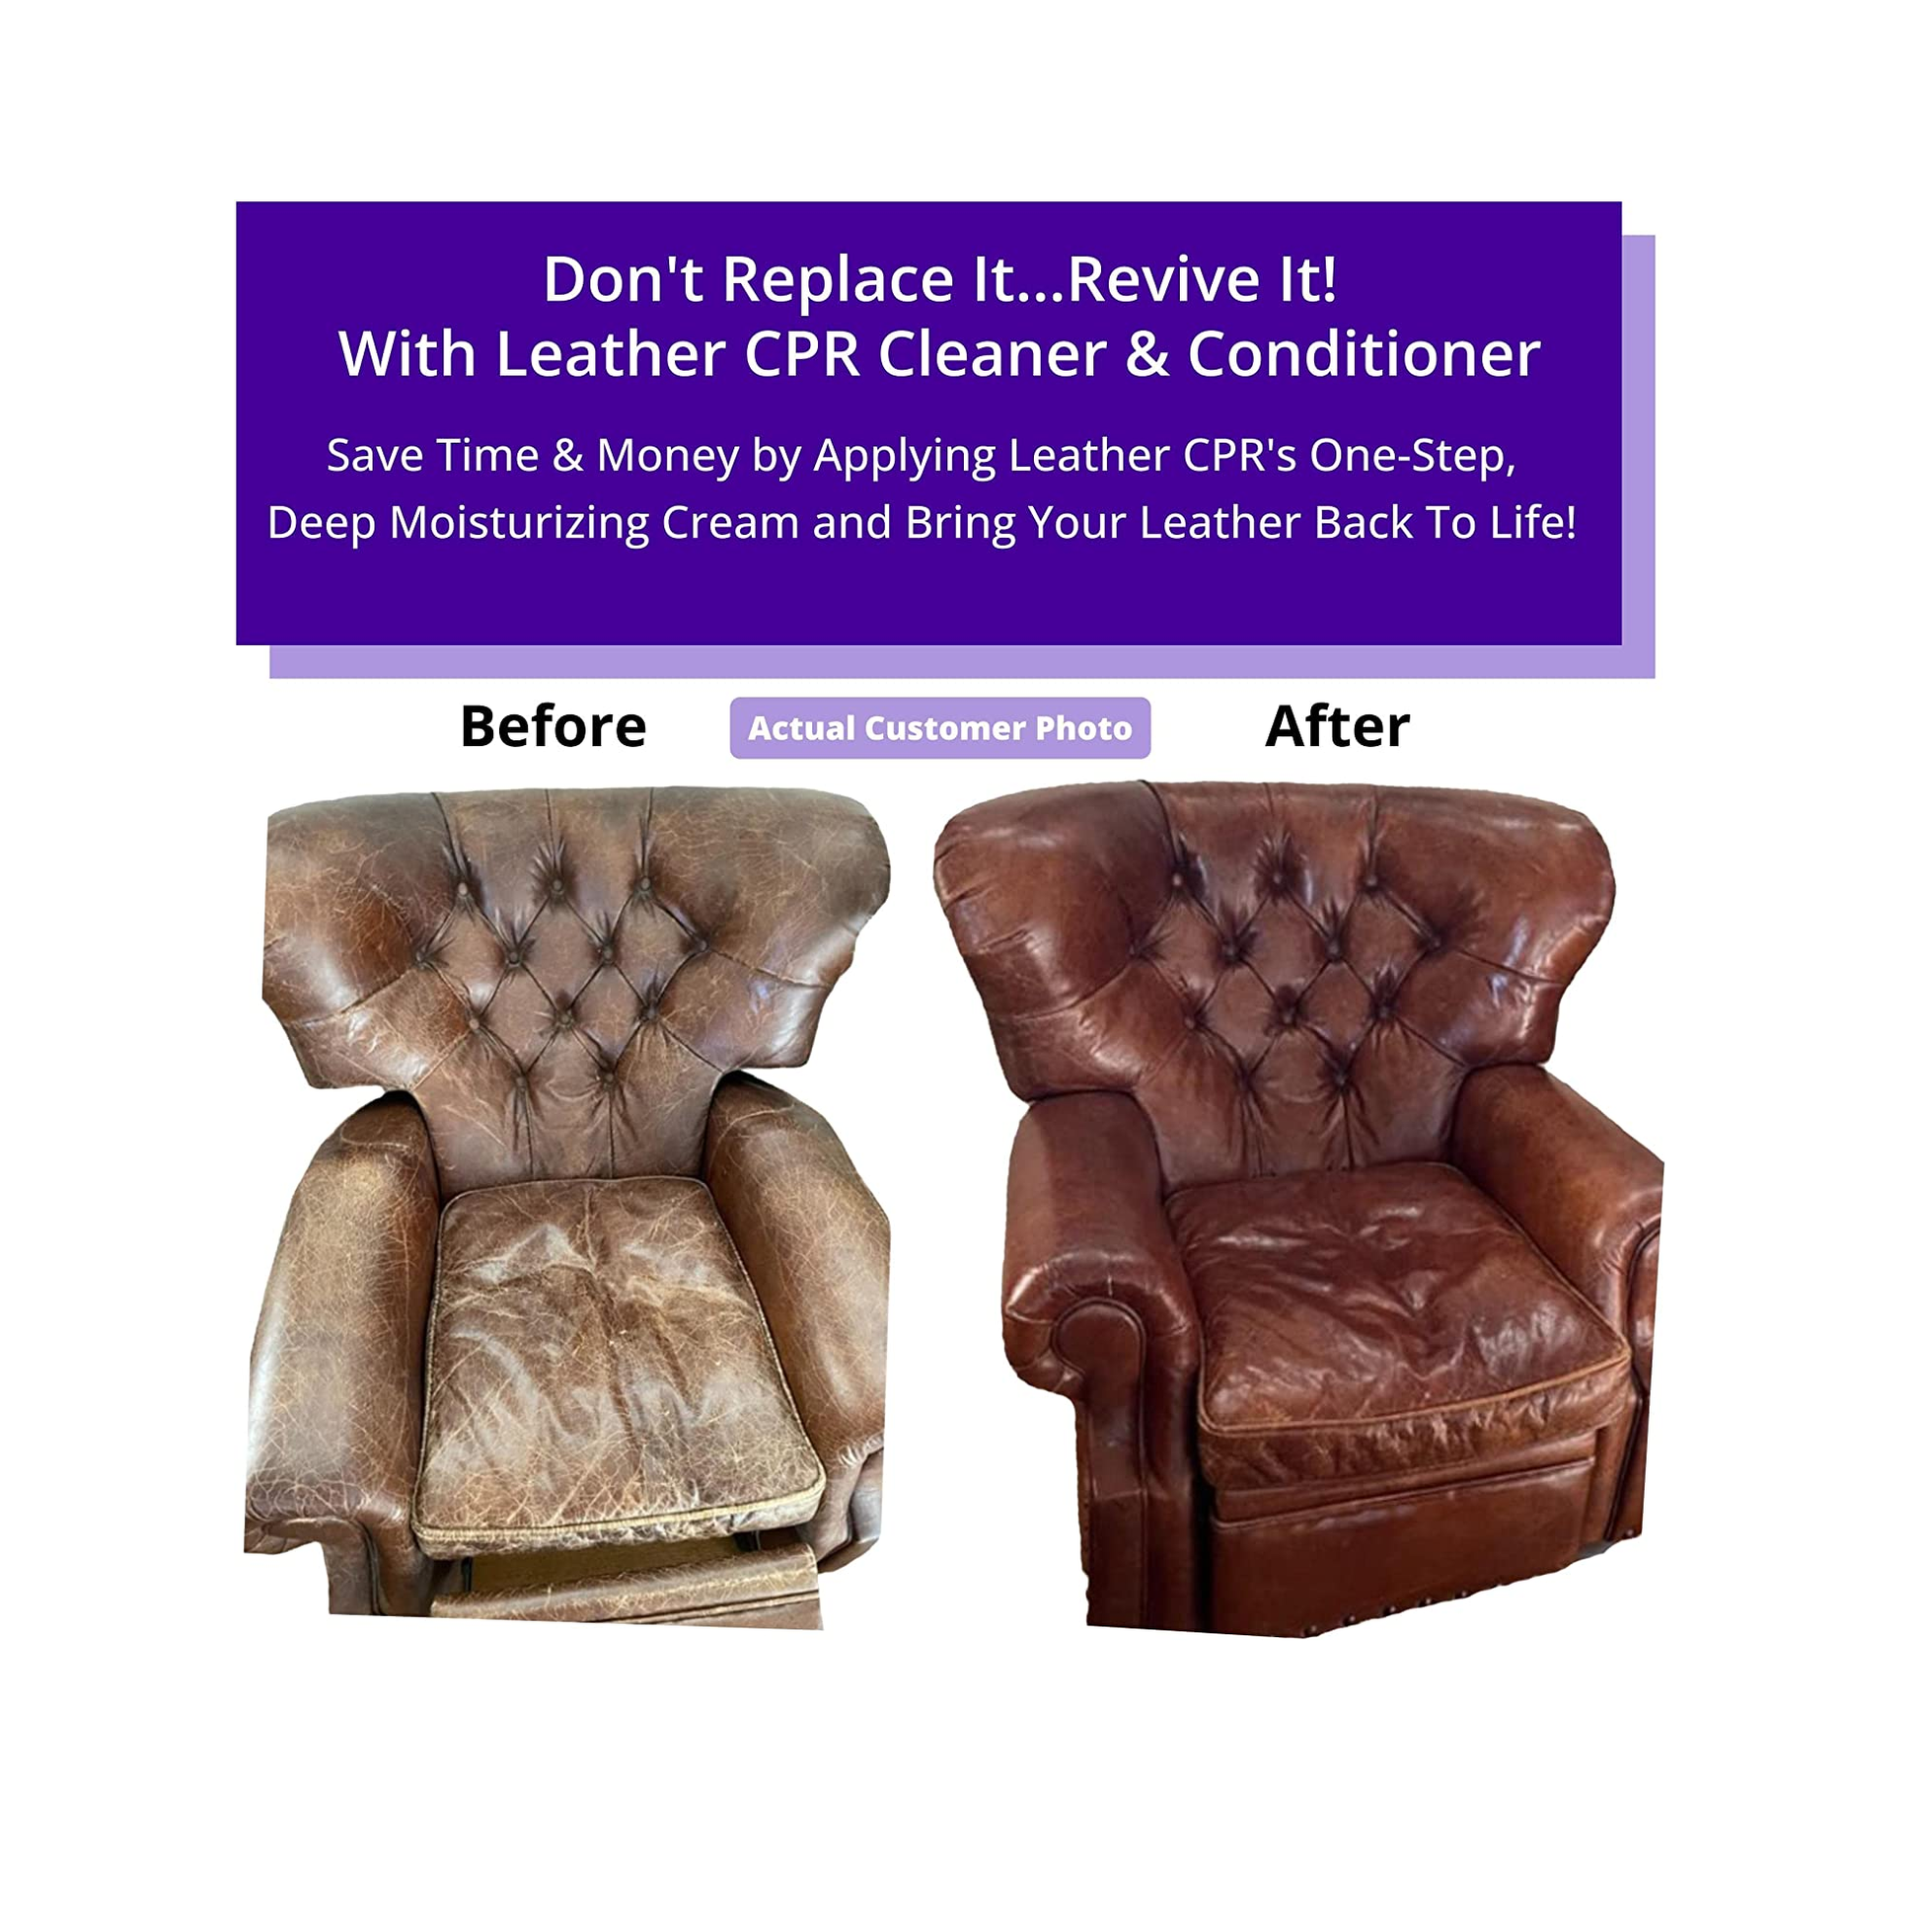 Leather CPR Cleaner & Conditioner, Bring Leather Back To Life! 